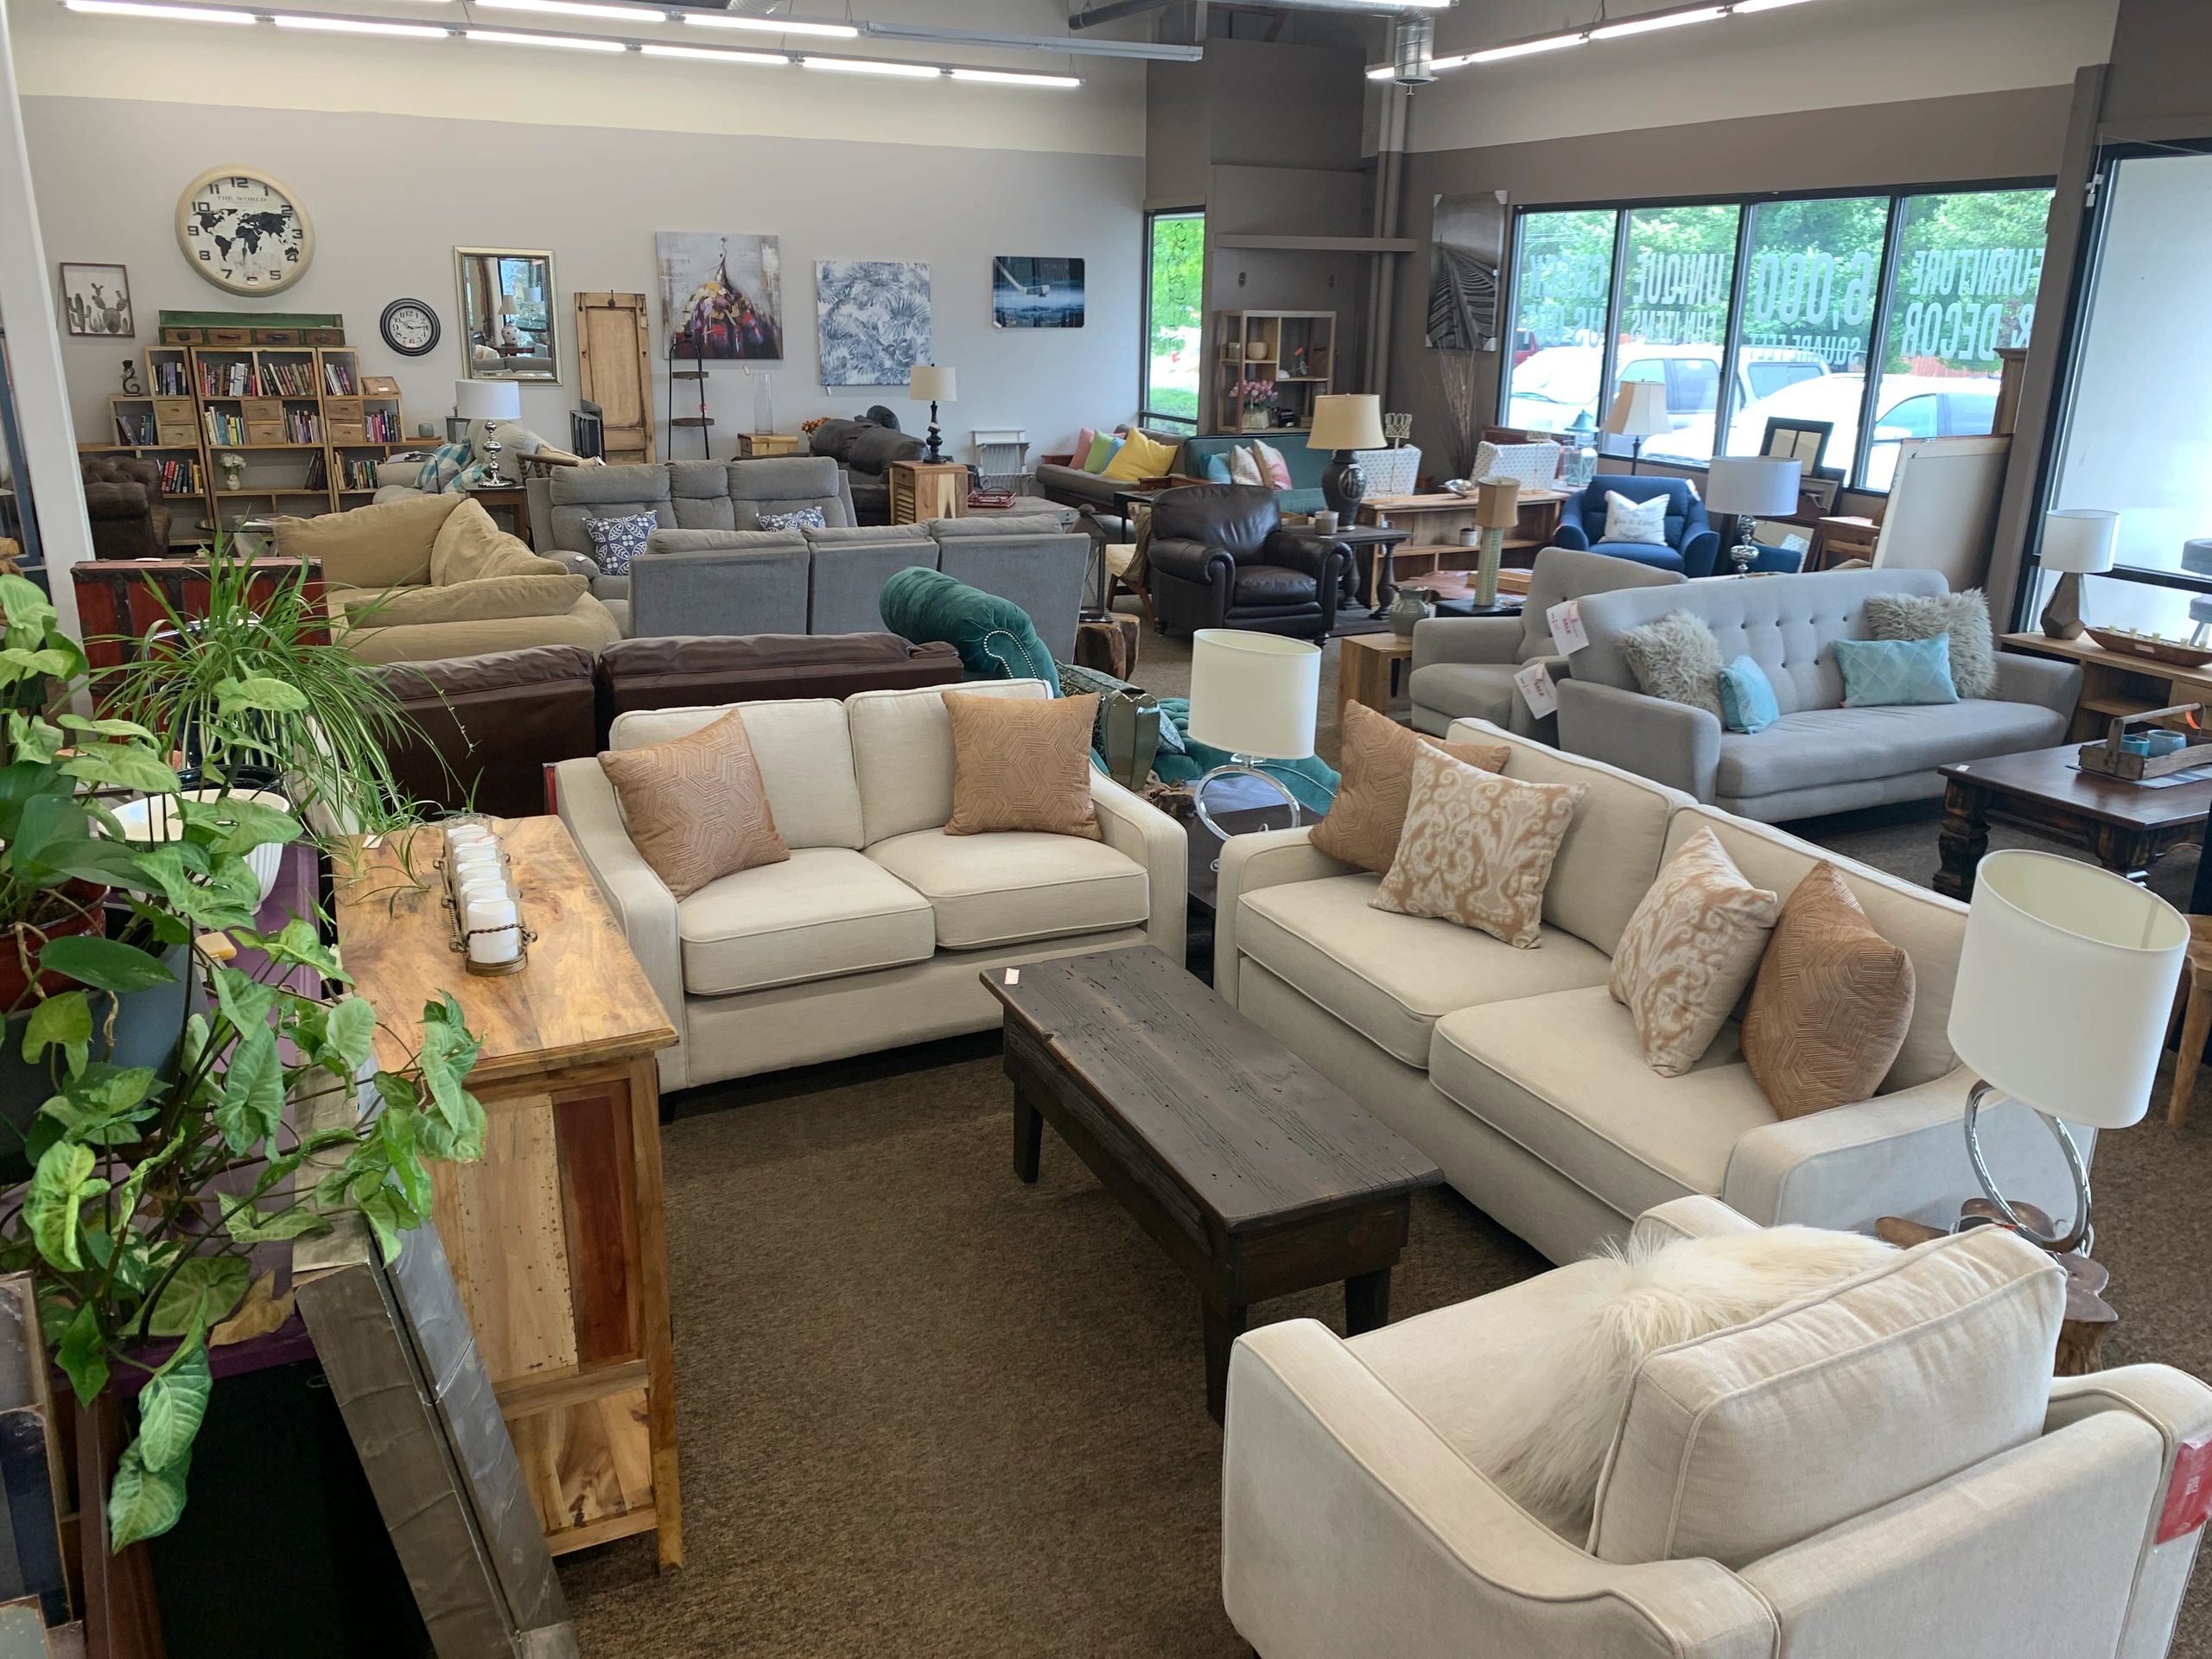 S & S Consignment Furniture